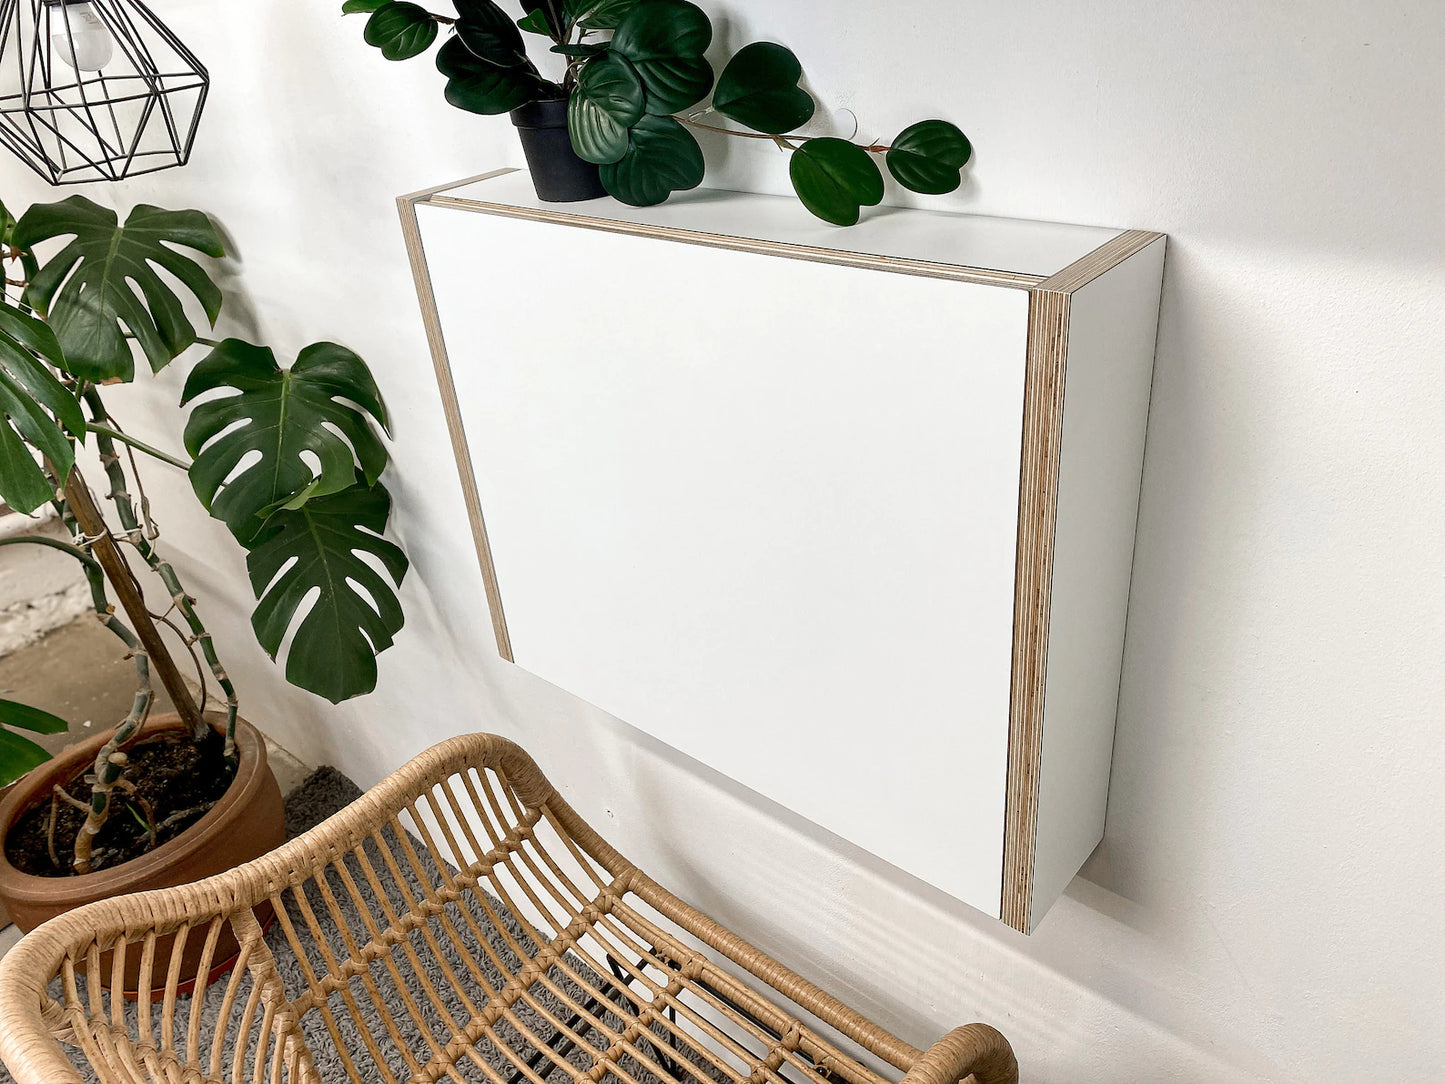 Small Folding Wall Mounted Desk with Shelves - White